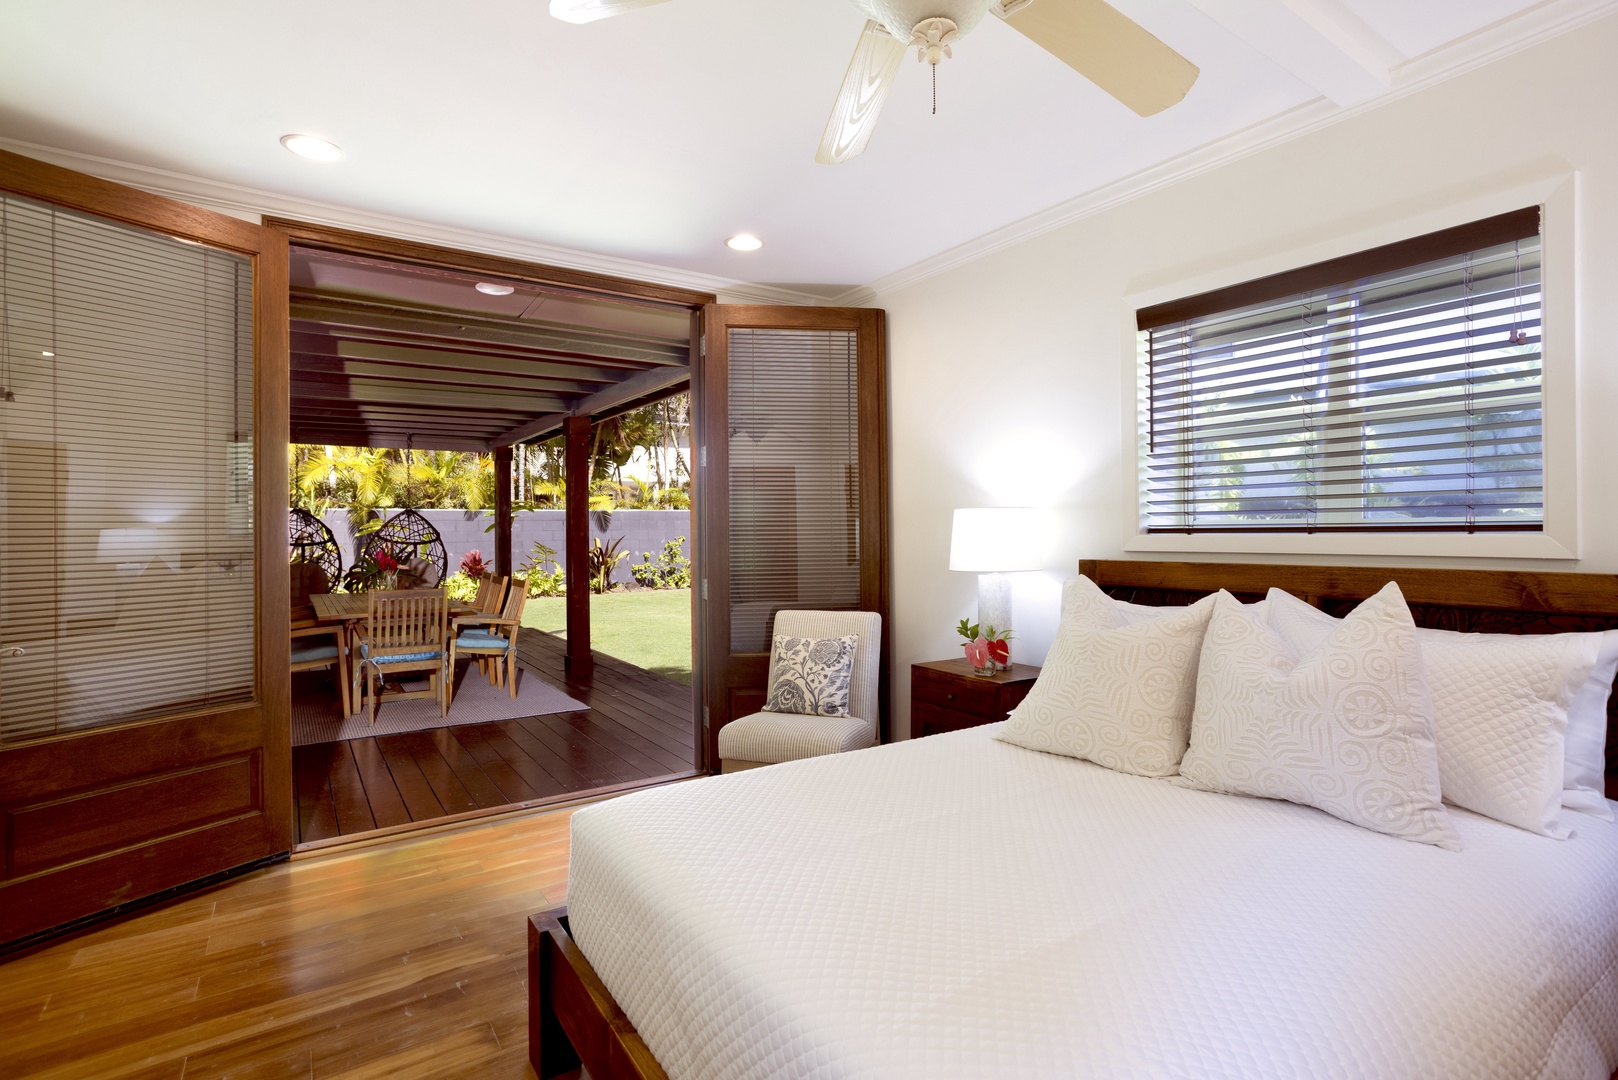 Kailua Vacation Rentals, Mokulua Seaside - Another guest suite with a queen bed located just right off the covered lanai